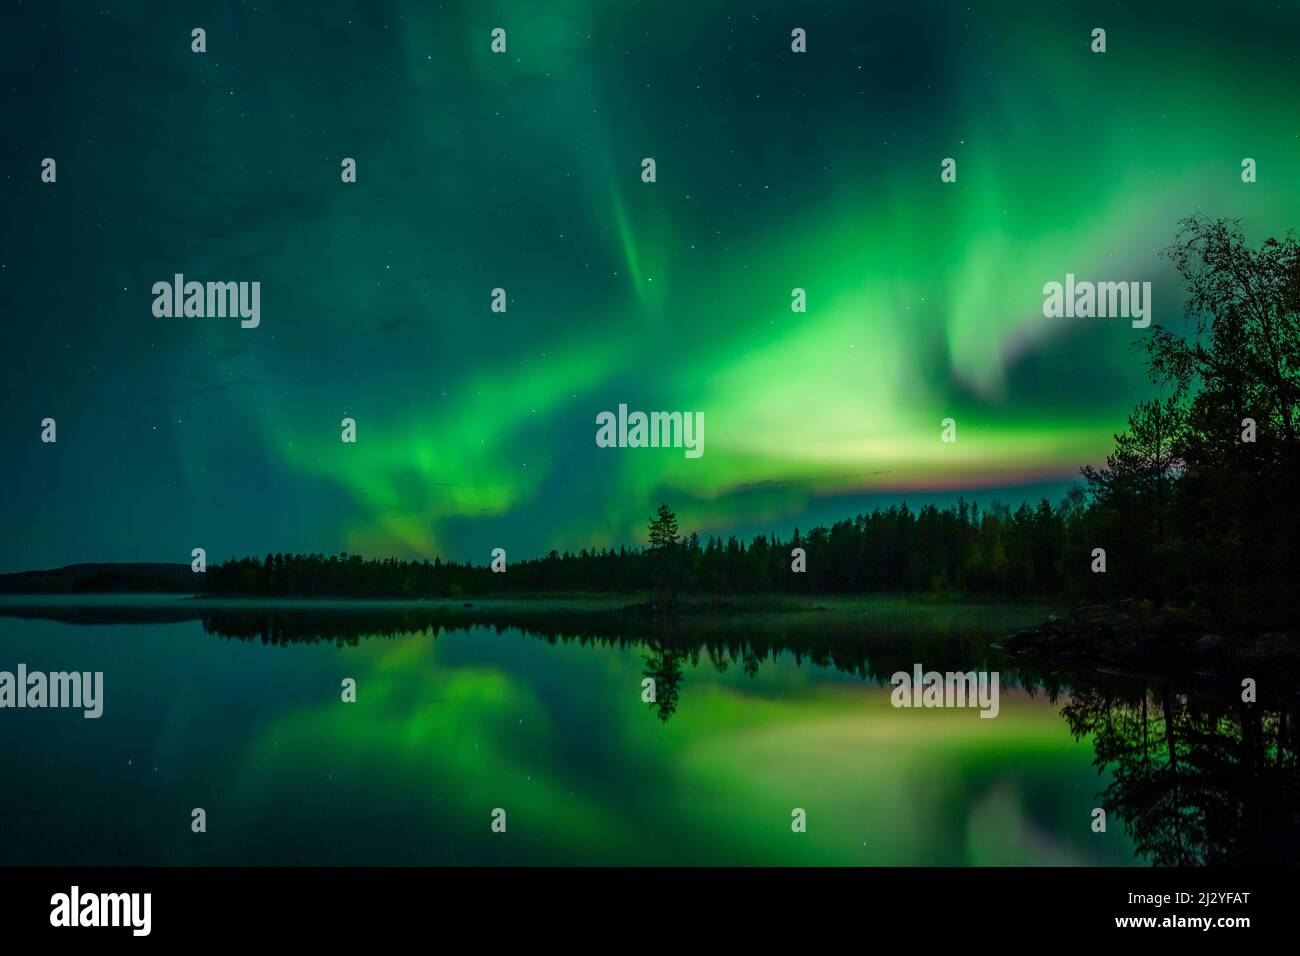 Northern lights in the night sky on the lakeshore with trees and reflection in the water in Lapland, Sweden Stock Photo